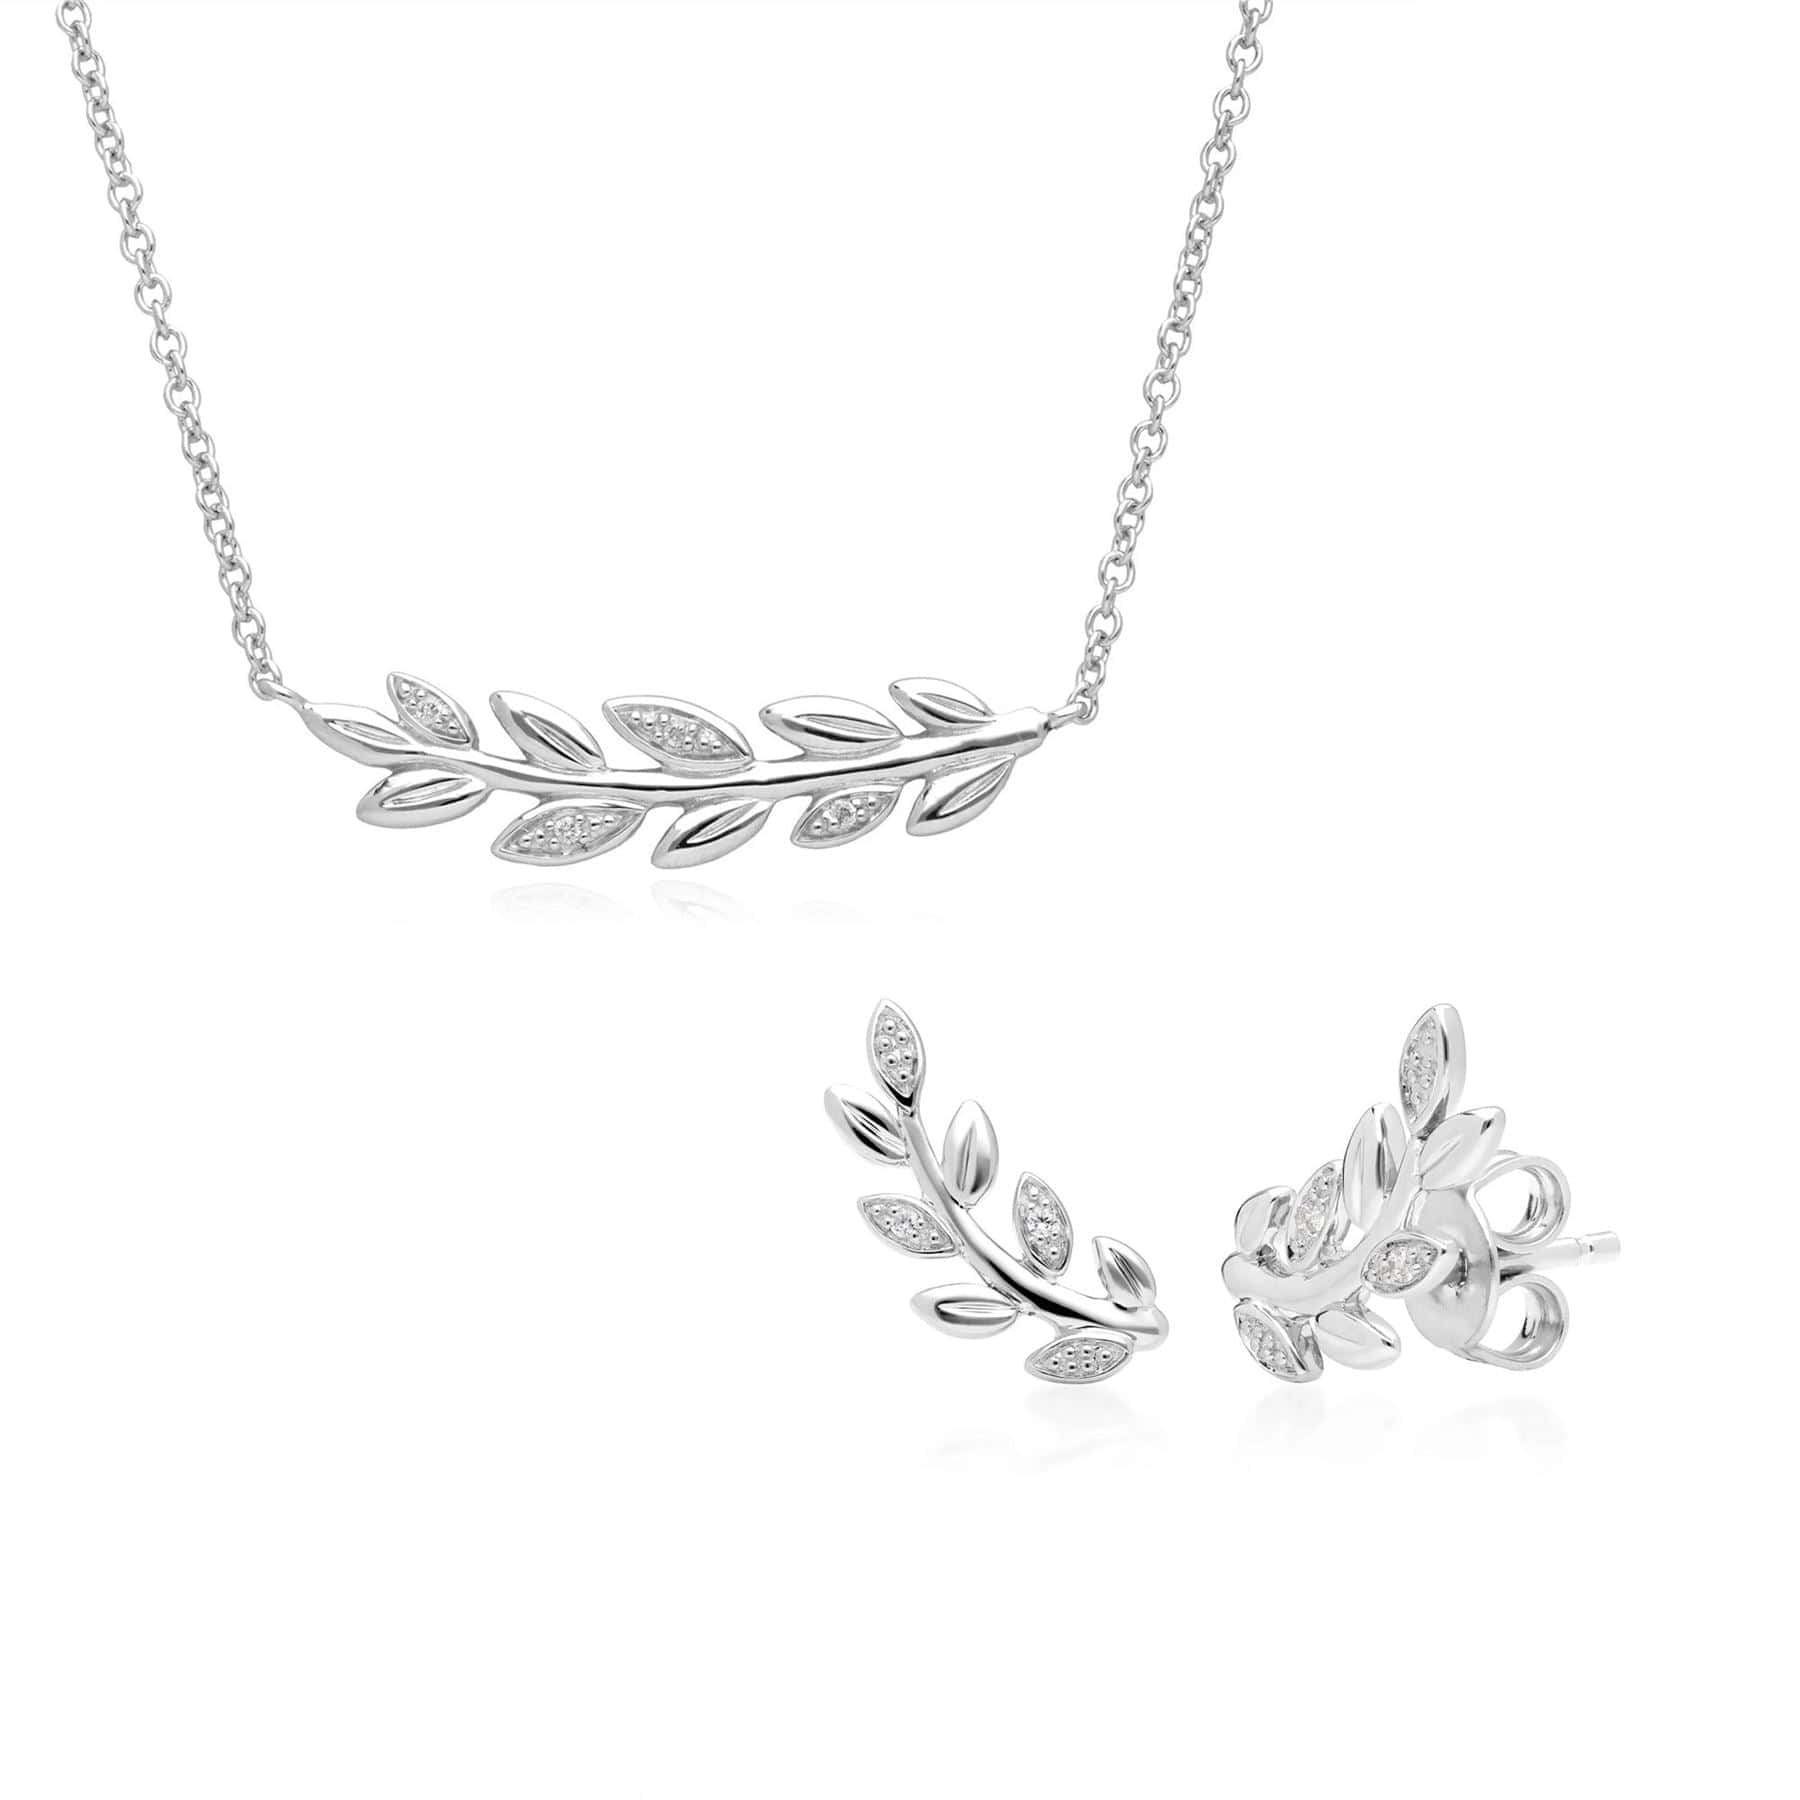 162N0035019-162E0273019 O Leaf Diamond Necklace & Stud Earring Set in 9ct White Gold 1